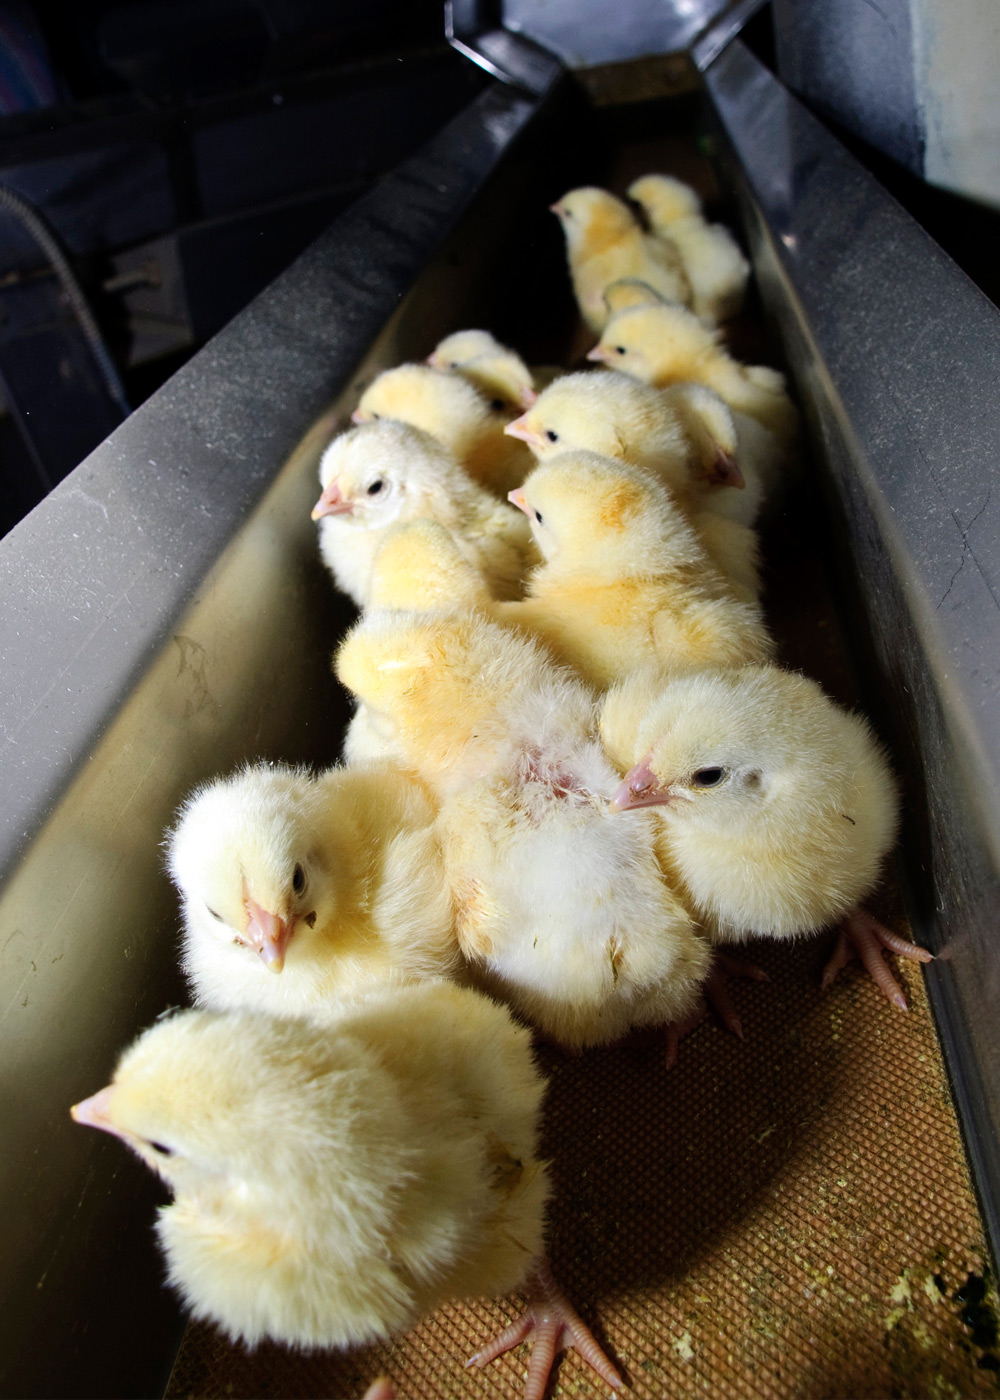 baby chicks about to be killed for "chick culling"